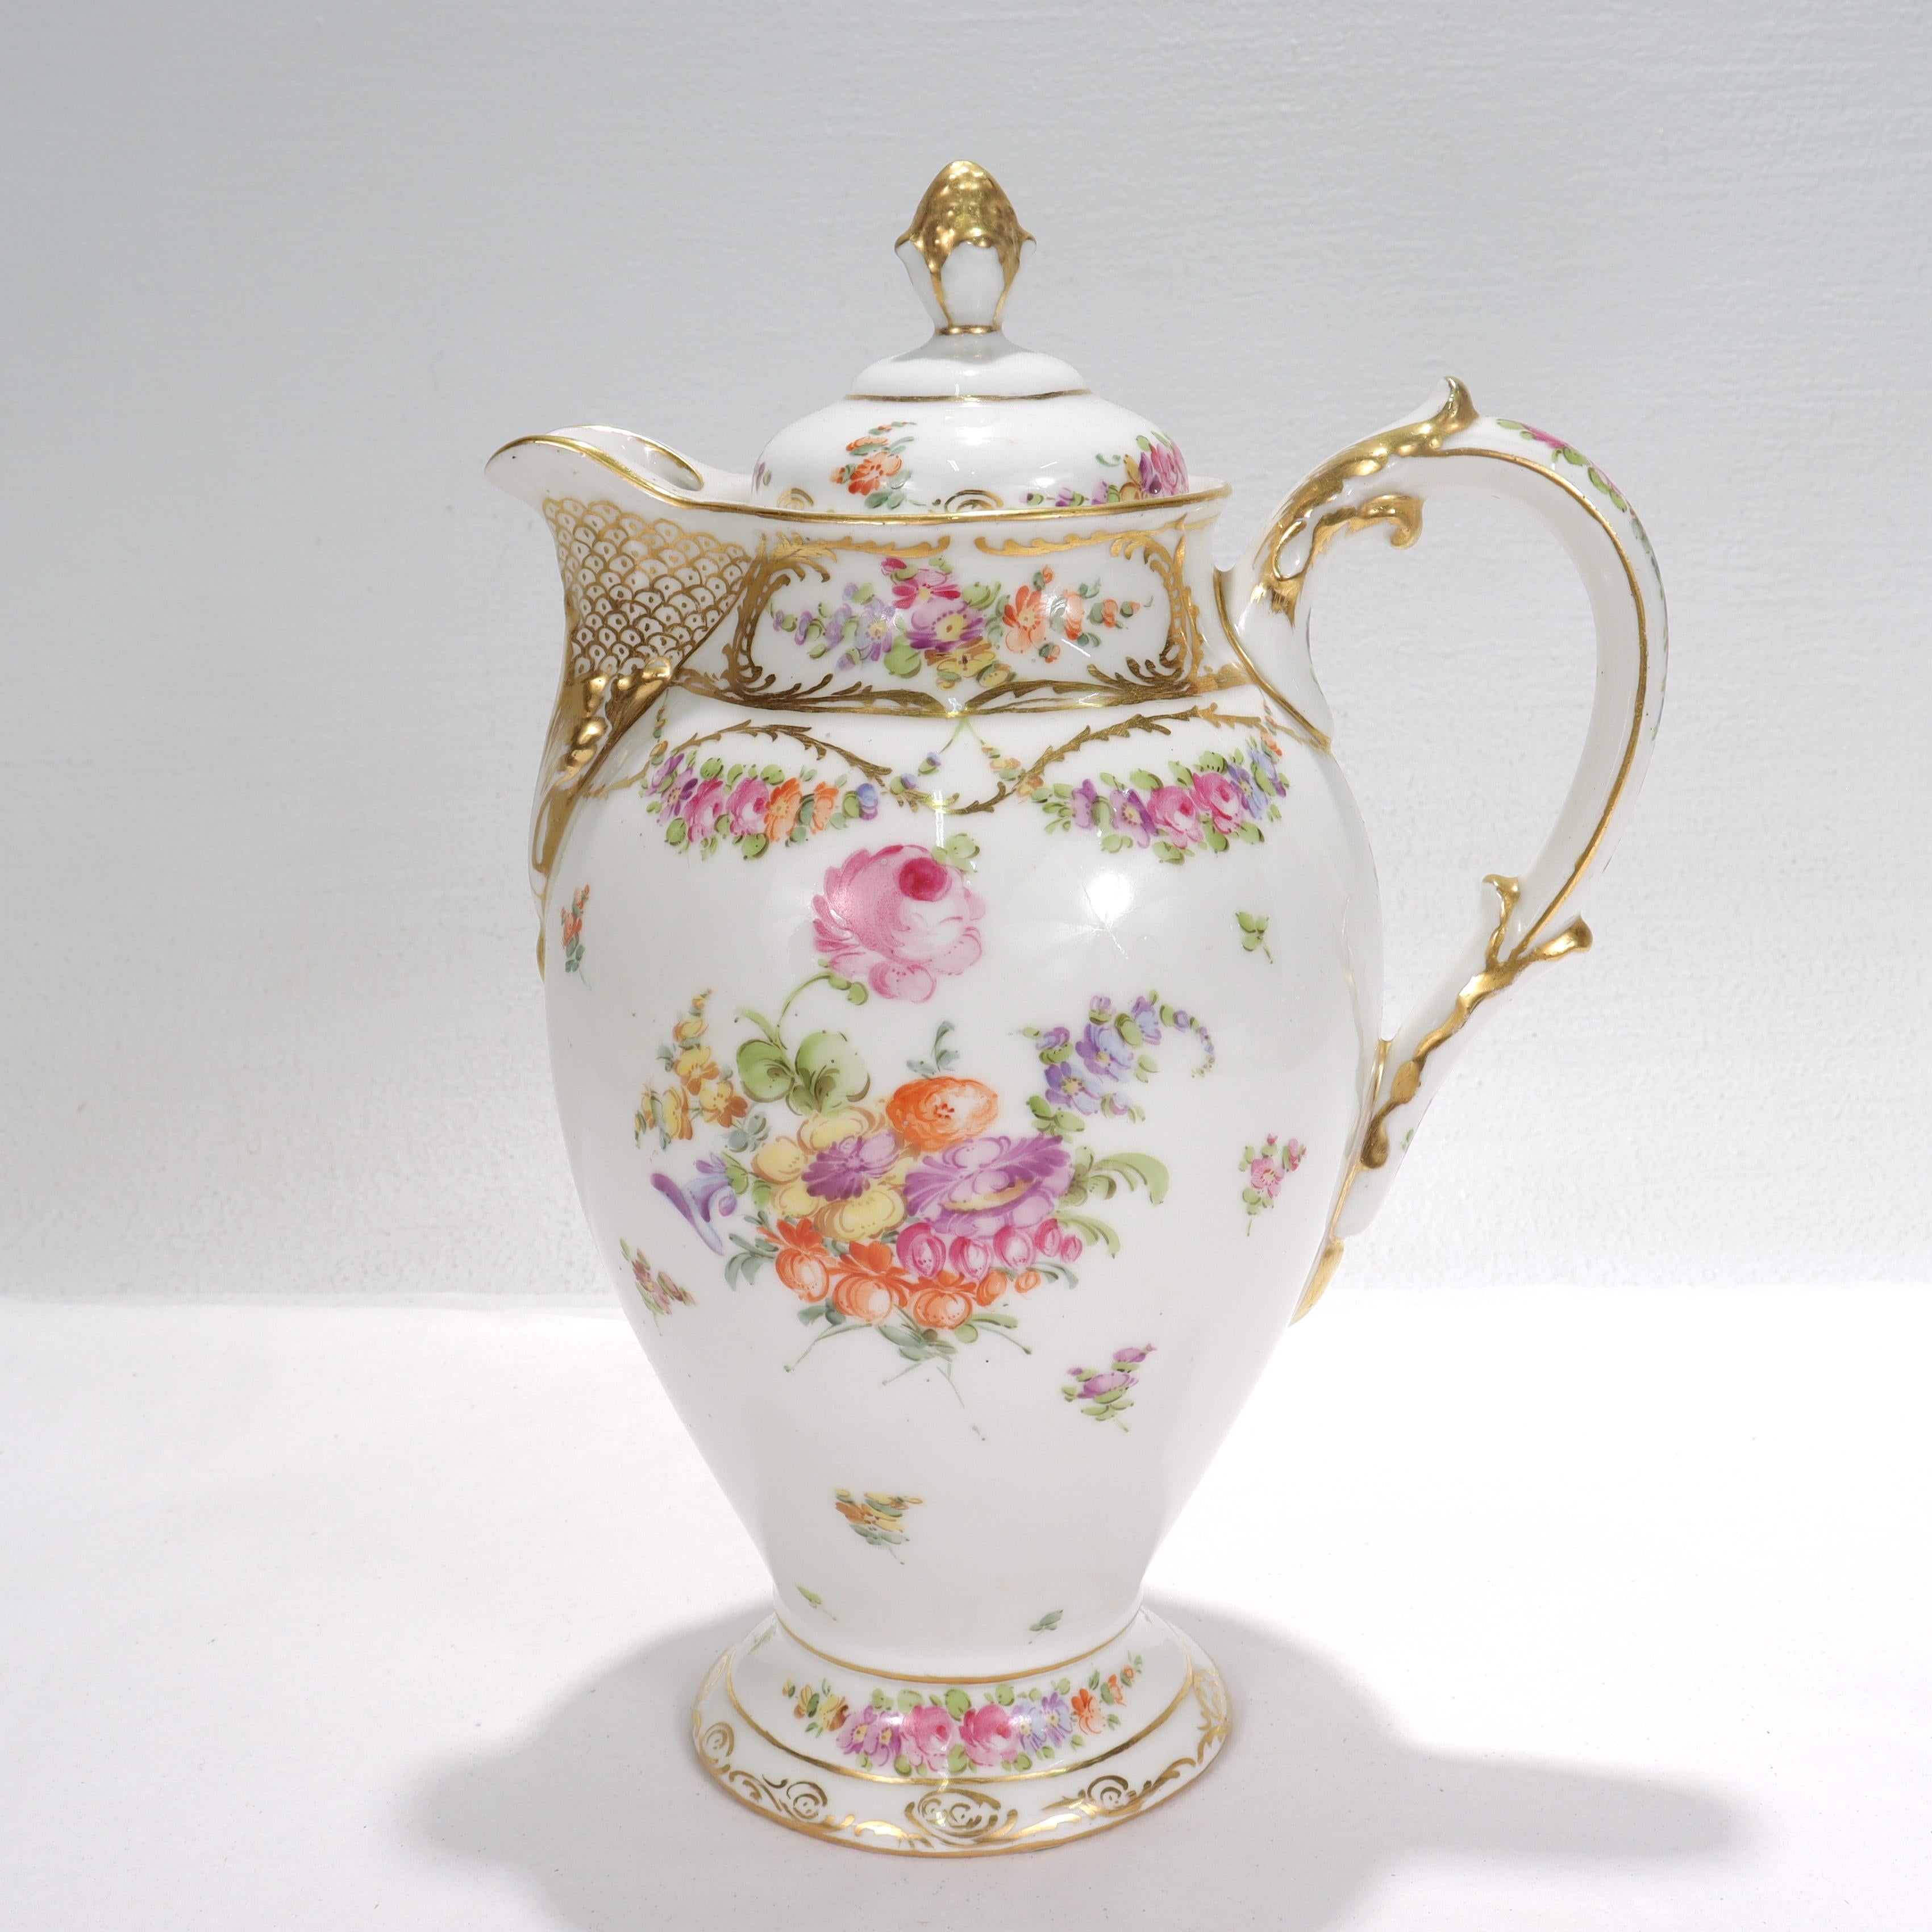 A fine antique Limoges porcelain chocolate or coffee pot.

Made by D&C (Delinieres & Co).

Decorated throughout with rich gilding, floral sprays, and hand painted Dresden type Deutsche Blumen.

There are small black specks or dots to the body